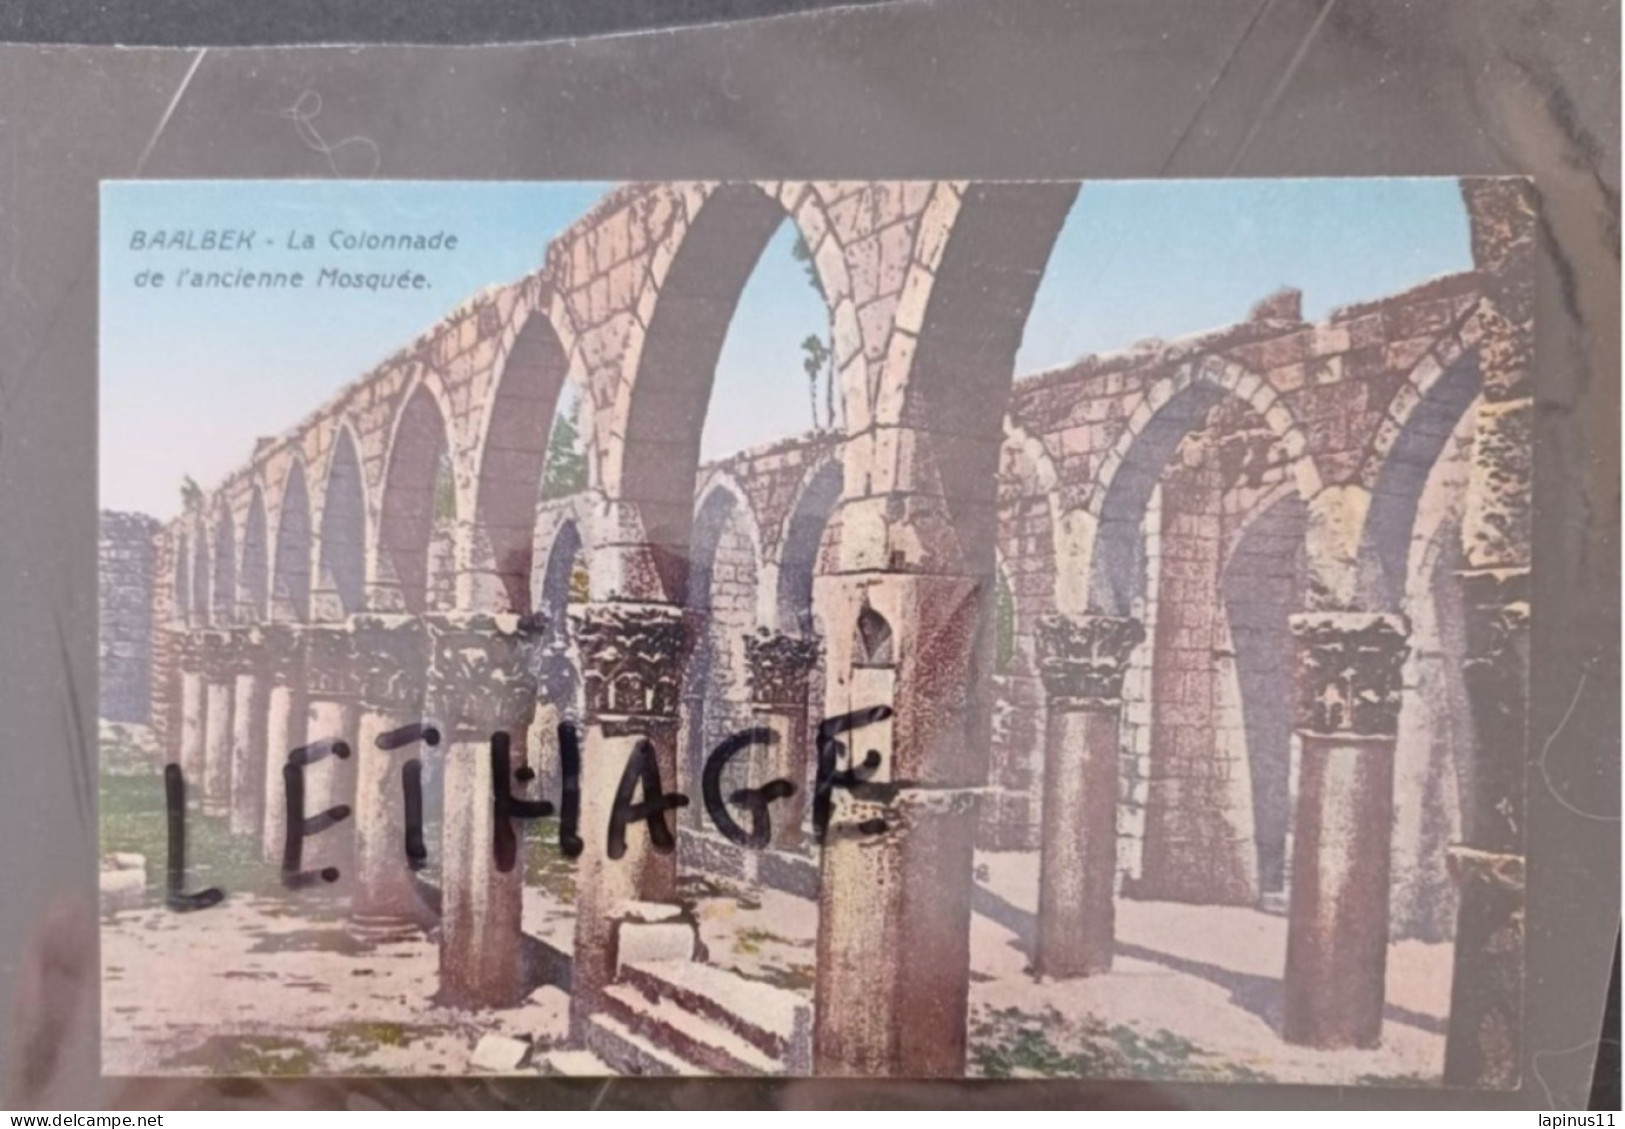 LIBAN BAALBECK COLONNADE MOSQUEE POSTCARD NEW TYPOGRAPHIC PRINT PRODUCED BY SARRAFIAN BROS BEIRUT (COLLECTOR'S)#1/169 - Liban